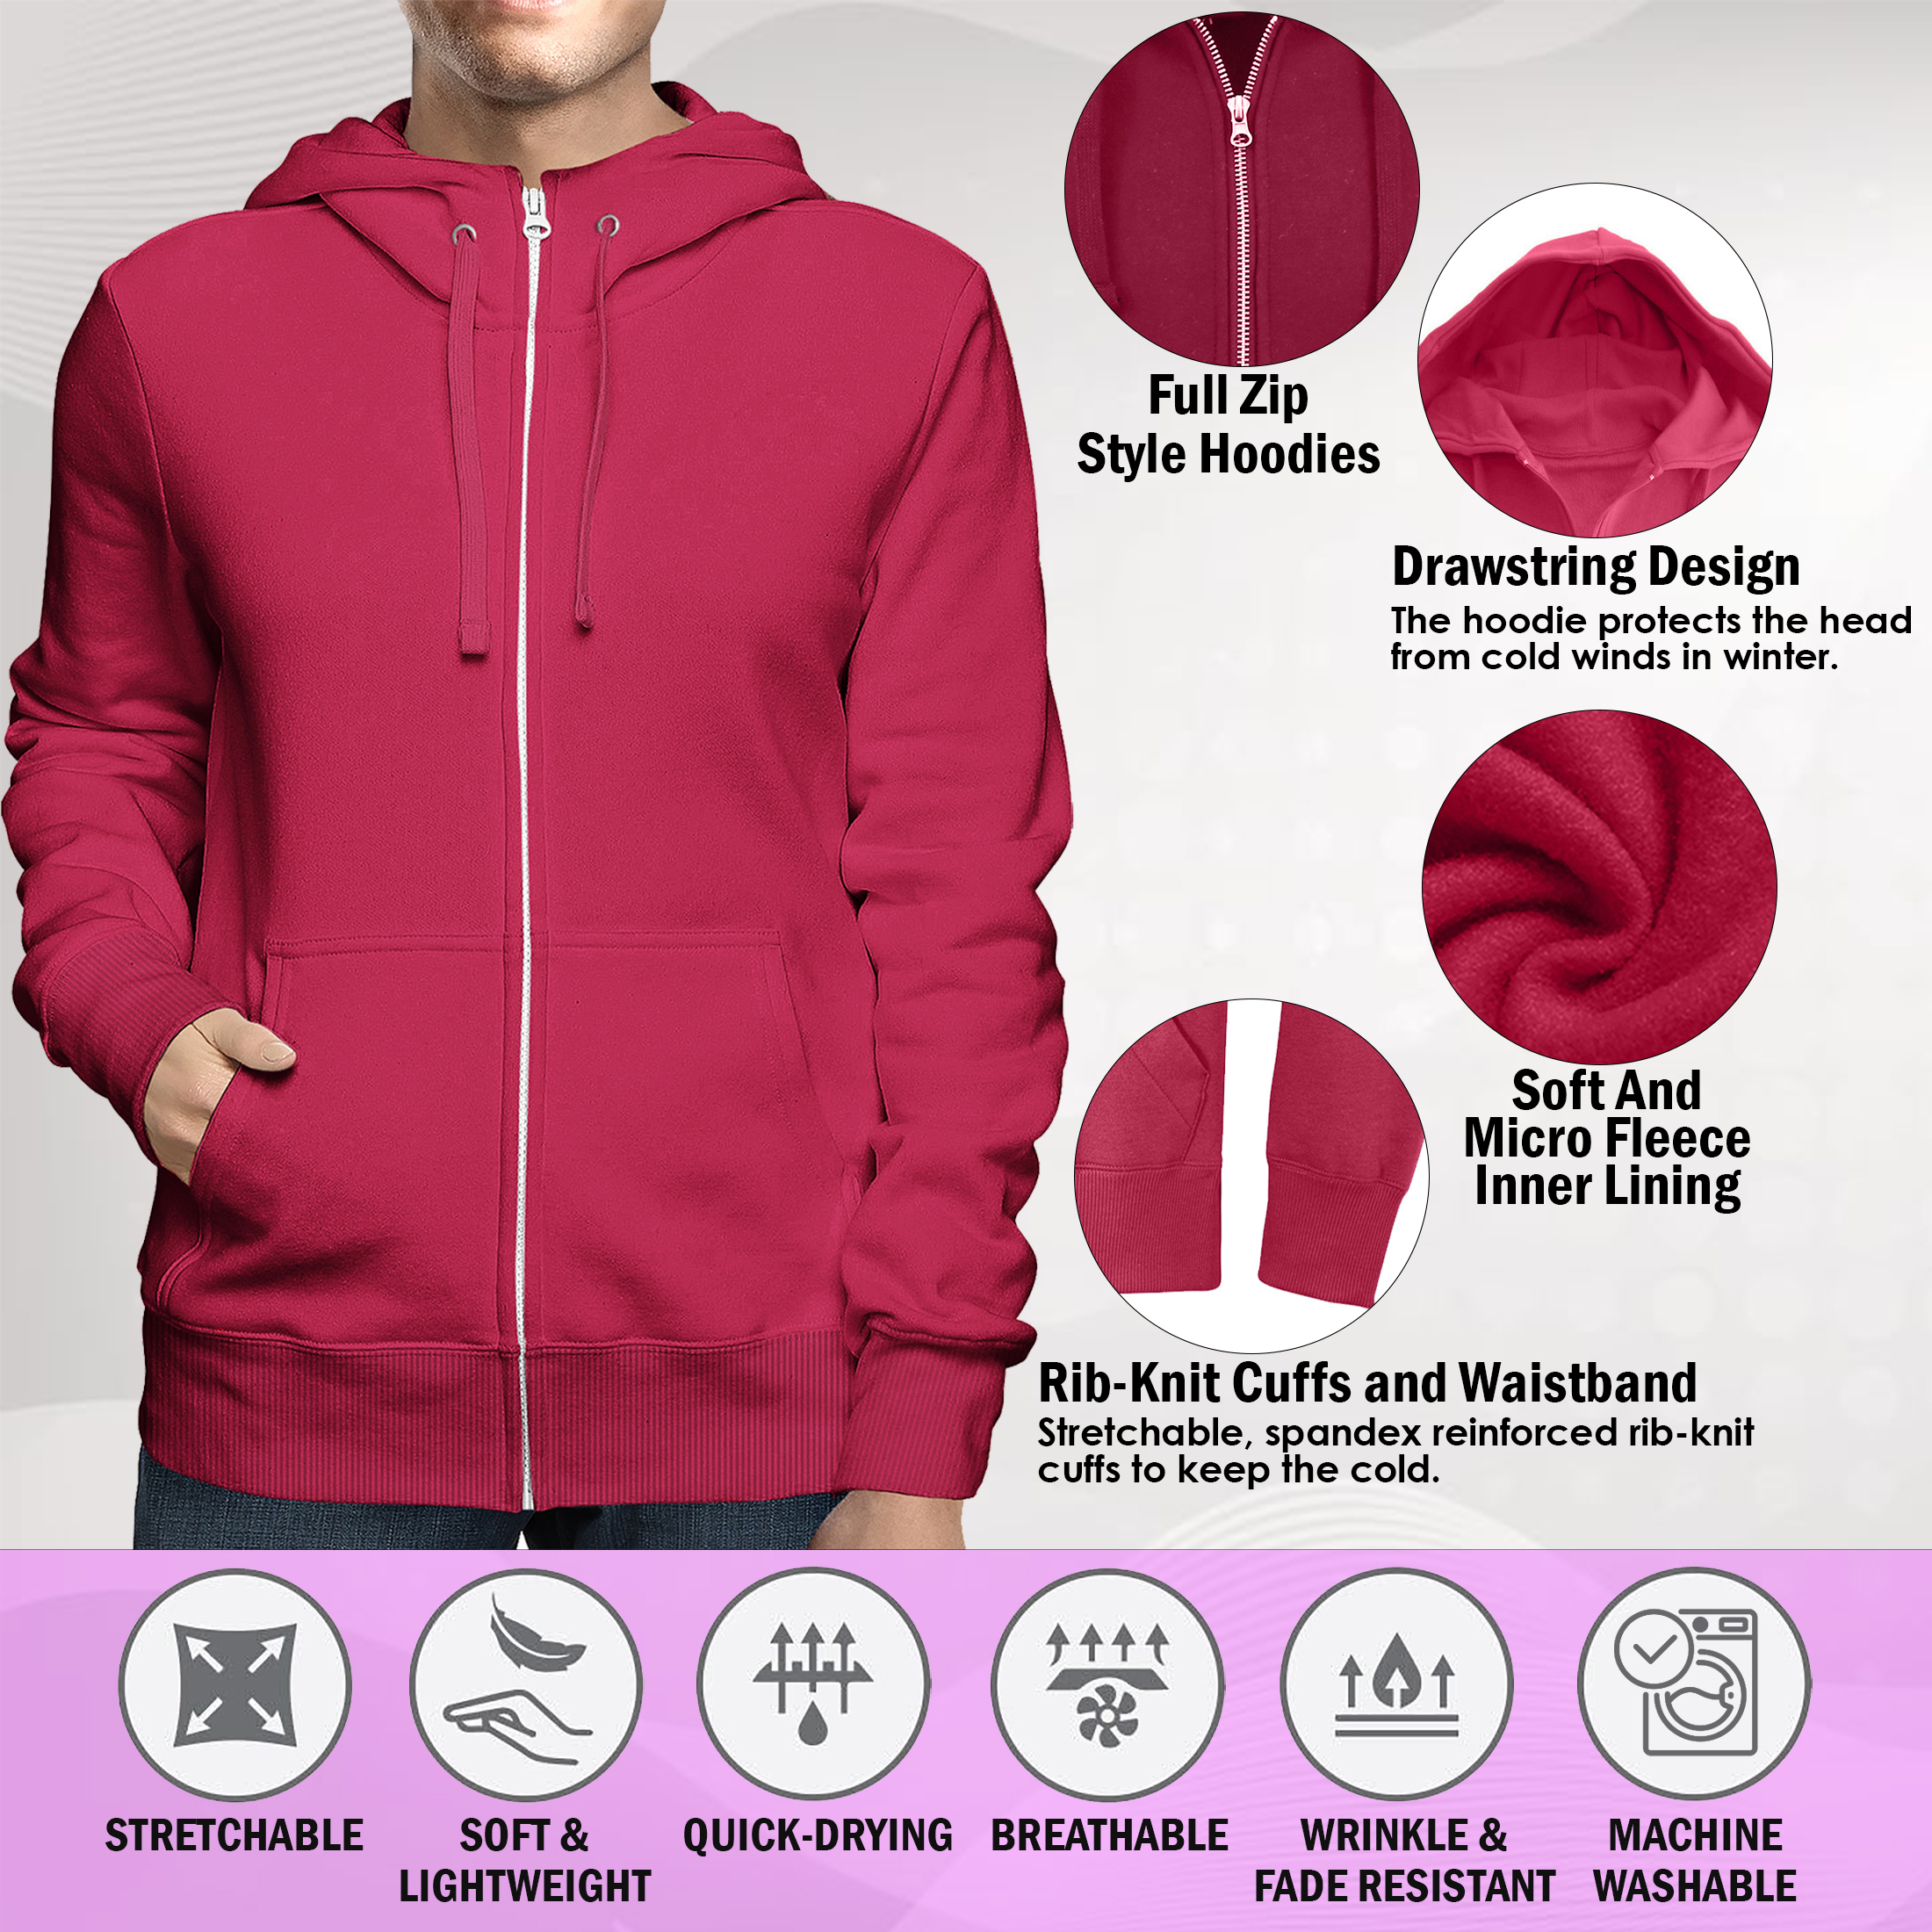 2-Pack: Men's Full Zip Up Fleece-Lined Hoodie Sweatshirt (Big & Tall Size Available) - Burgundy, 4x-large